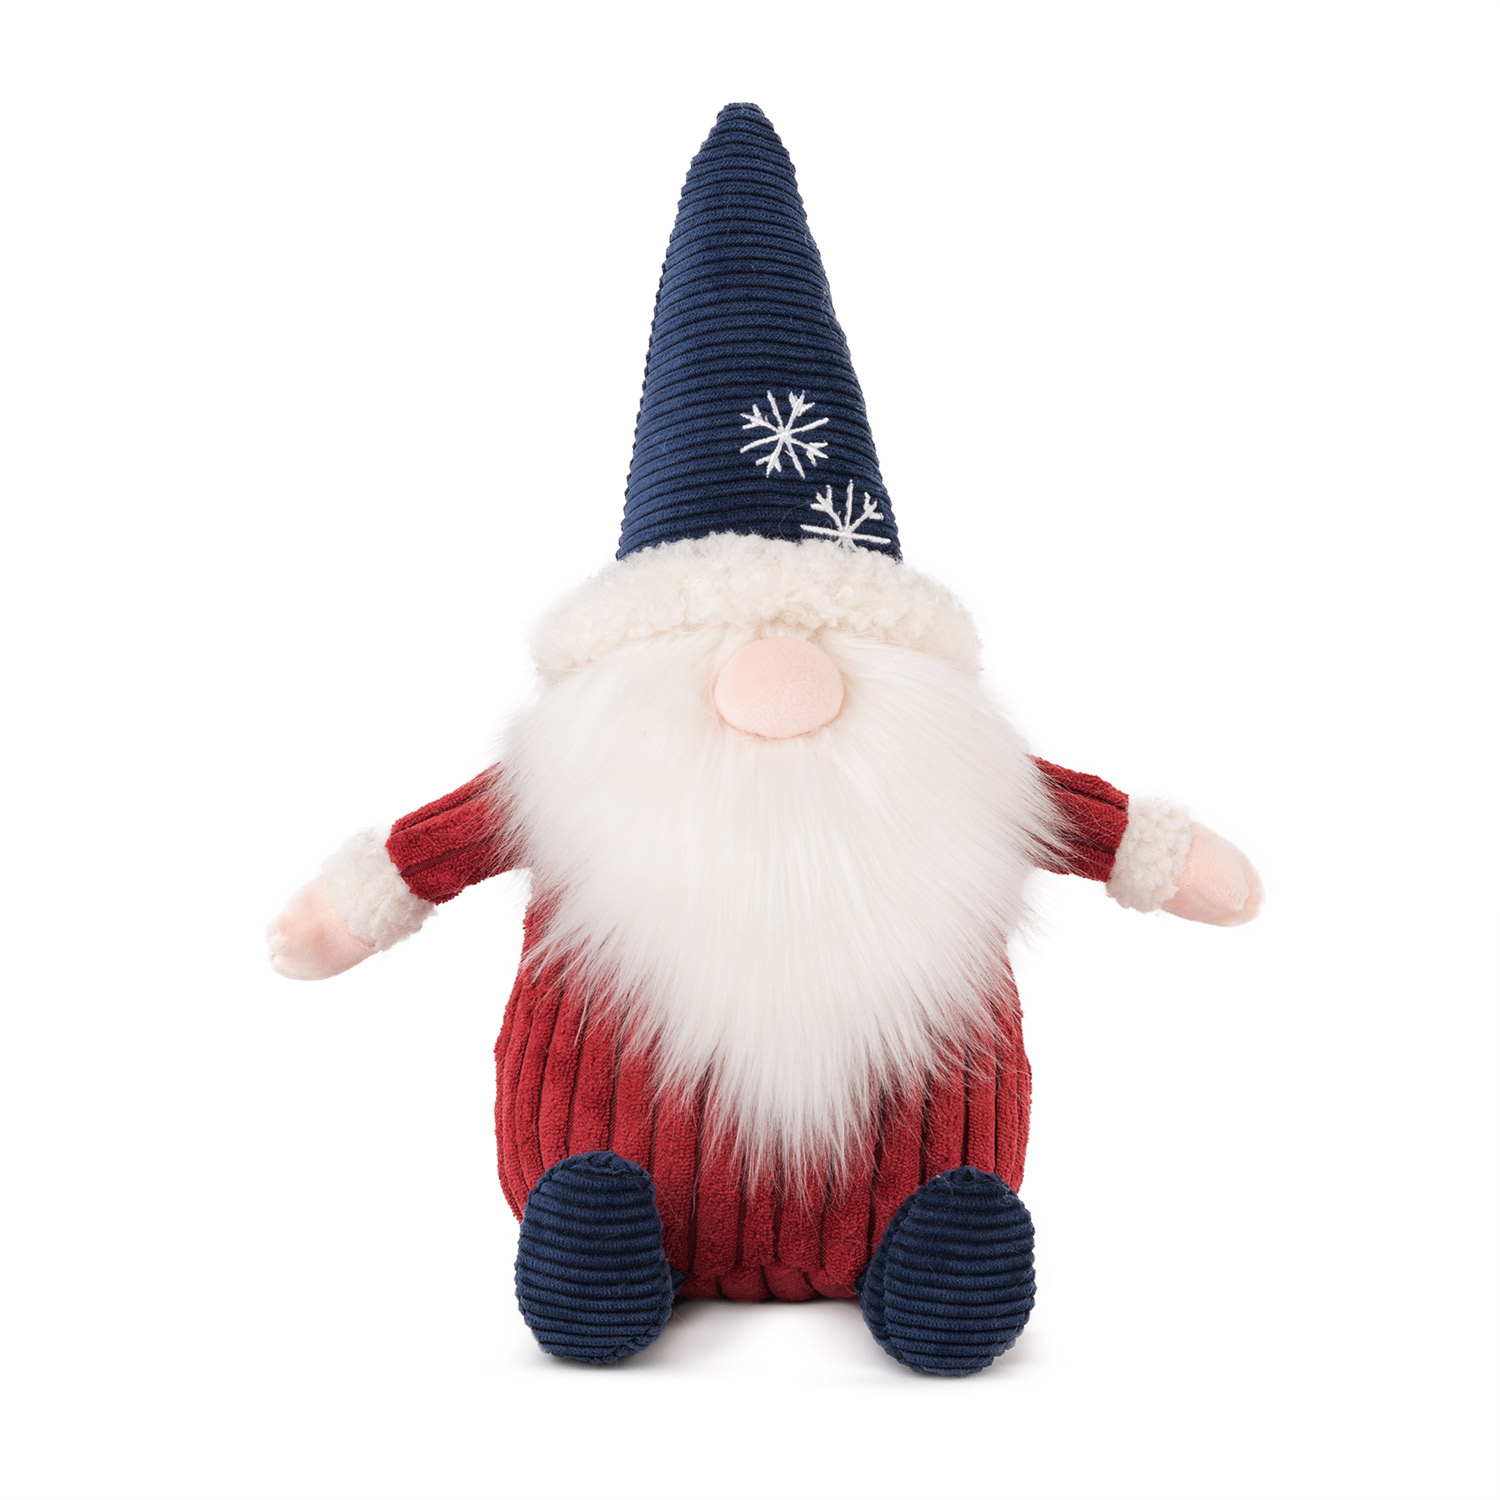 Gnome - Red with blue hat